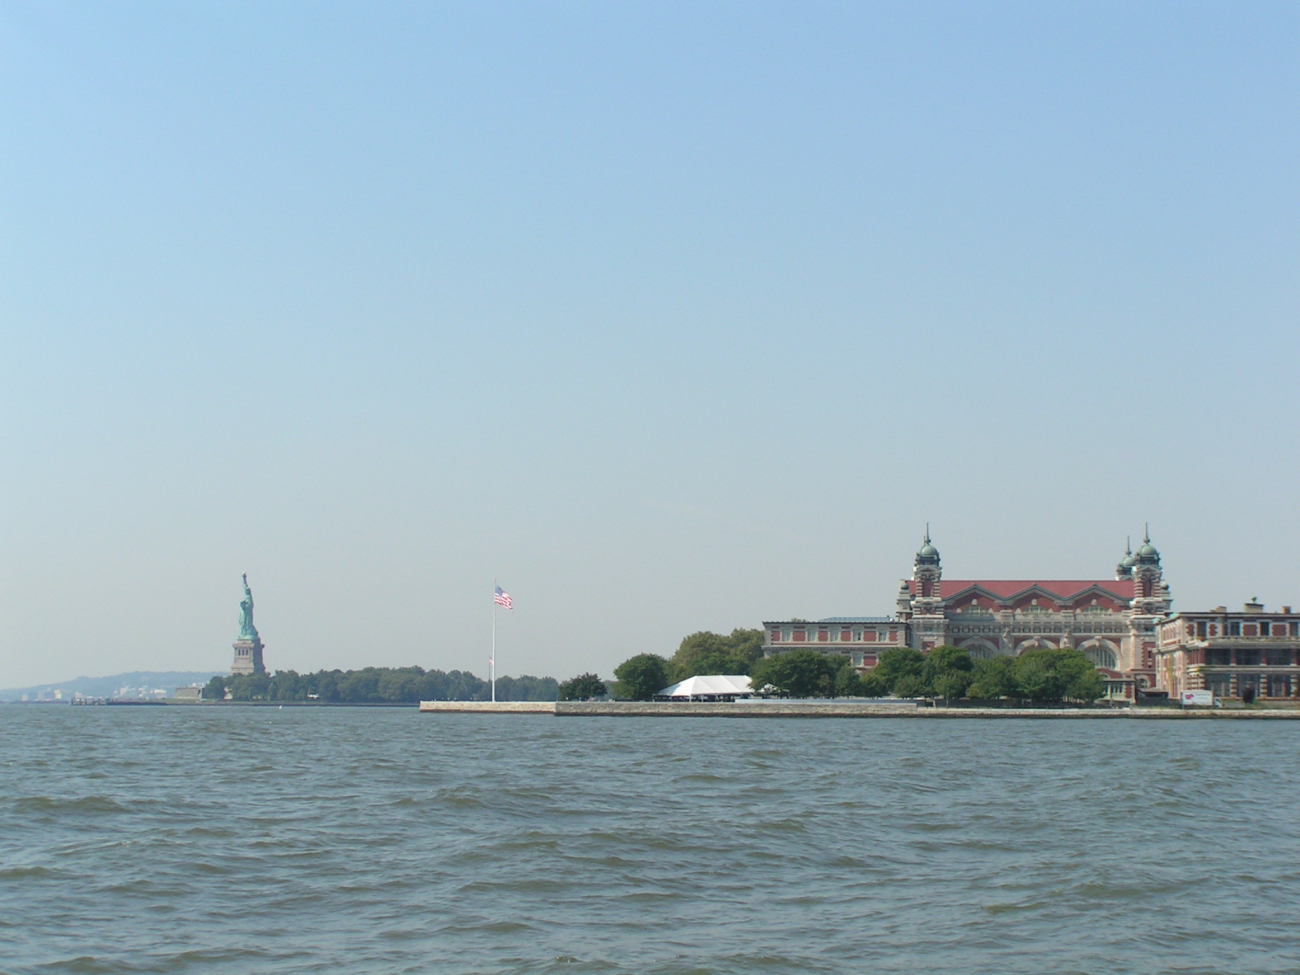 Ellis Island and the Statue of Liberty